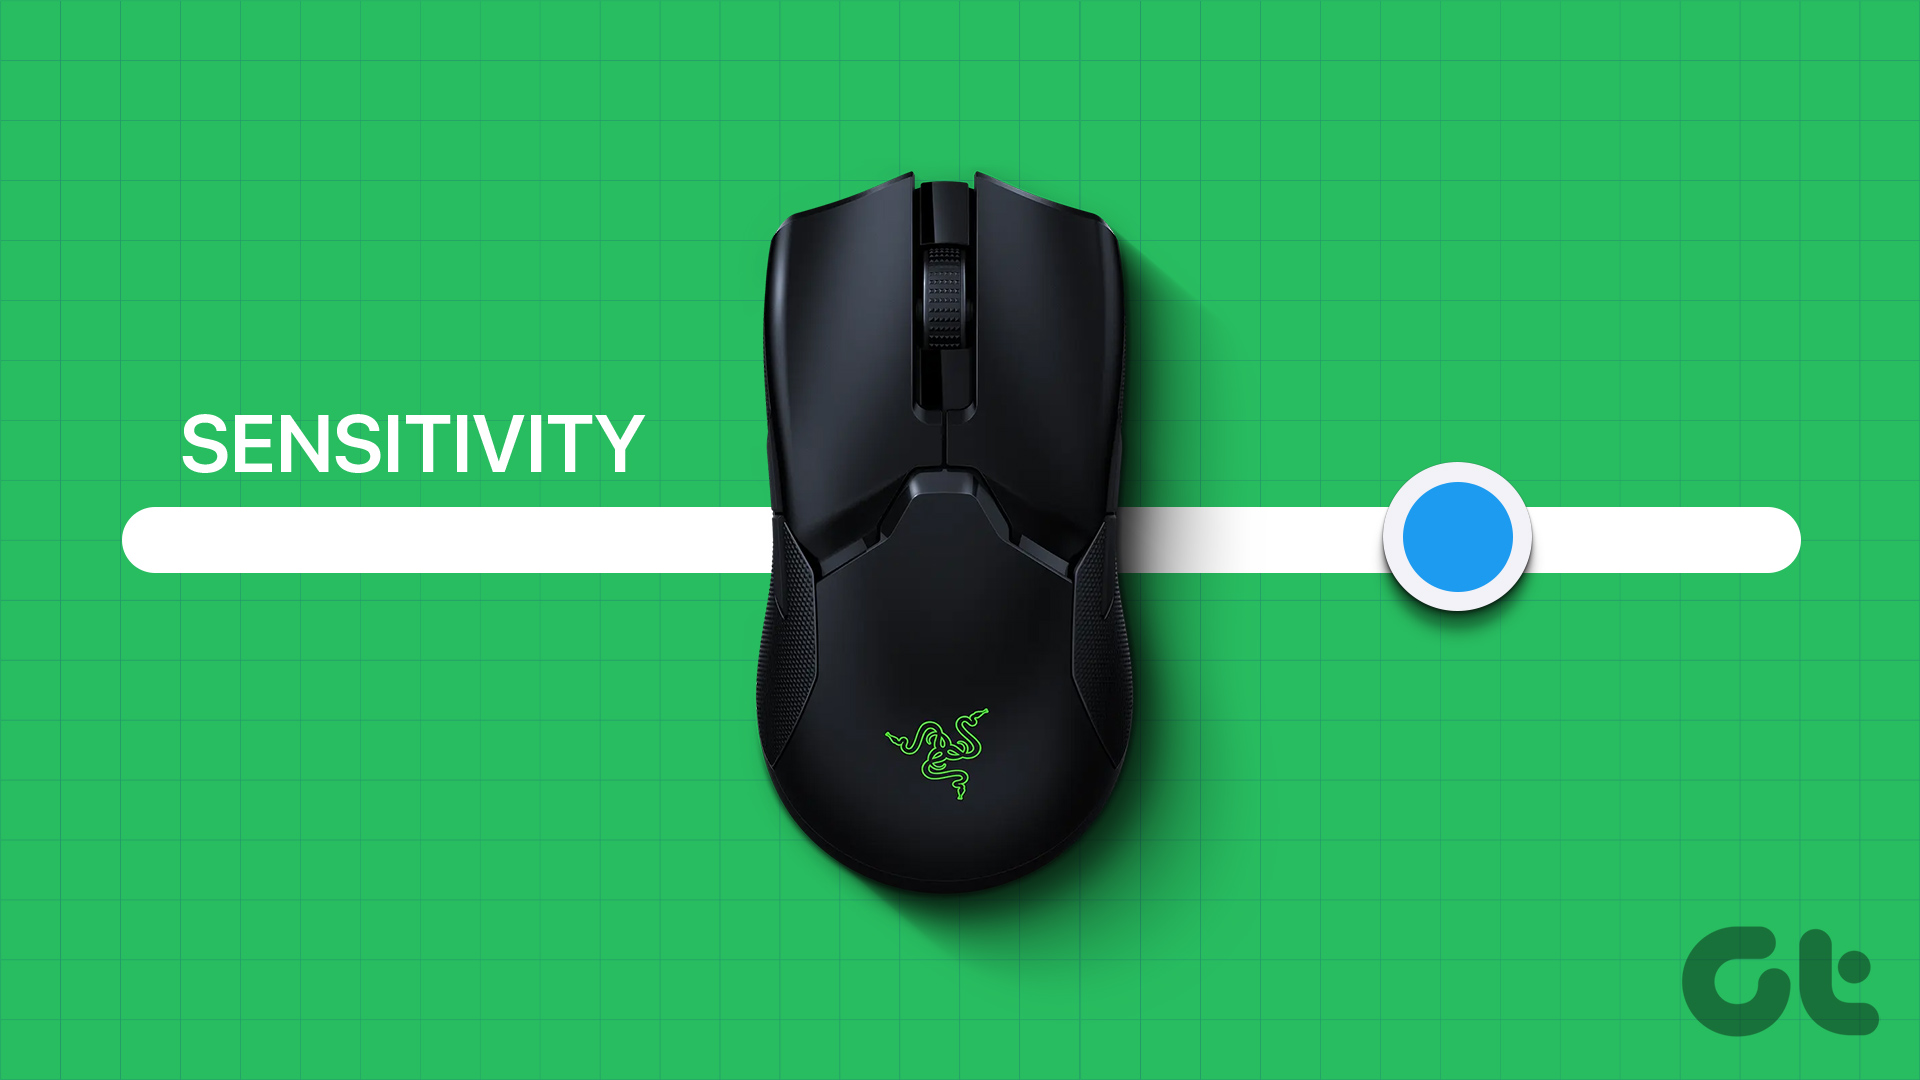 How to Change Mouse Sensitivity (DPI) and Other Settings in Windows 11